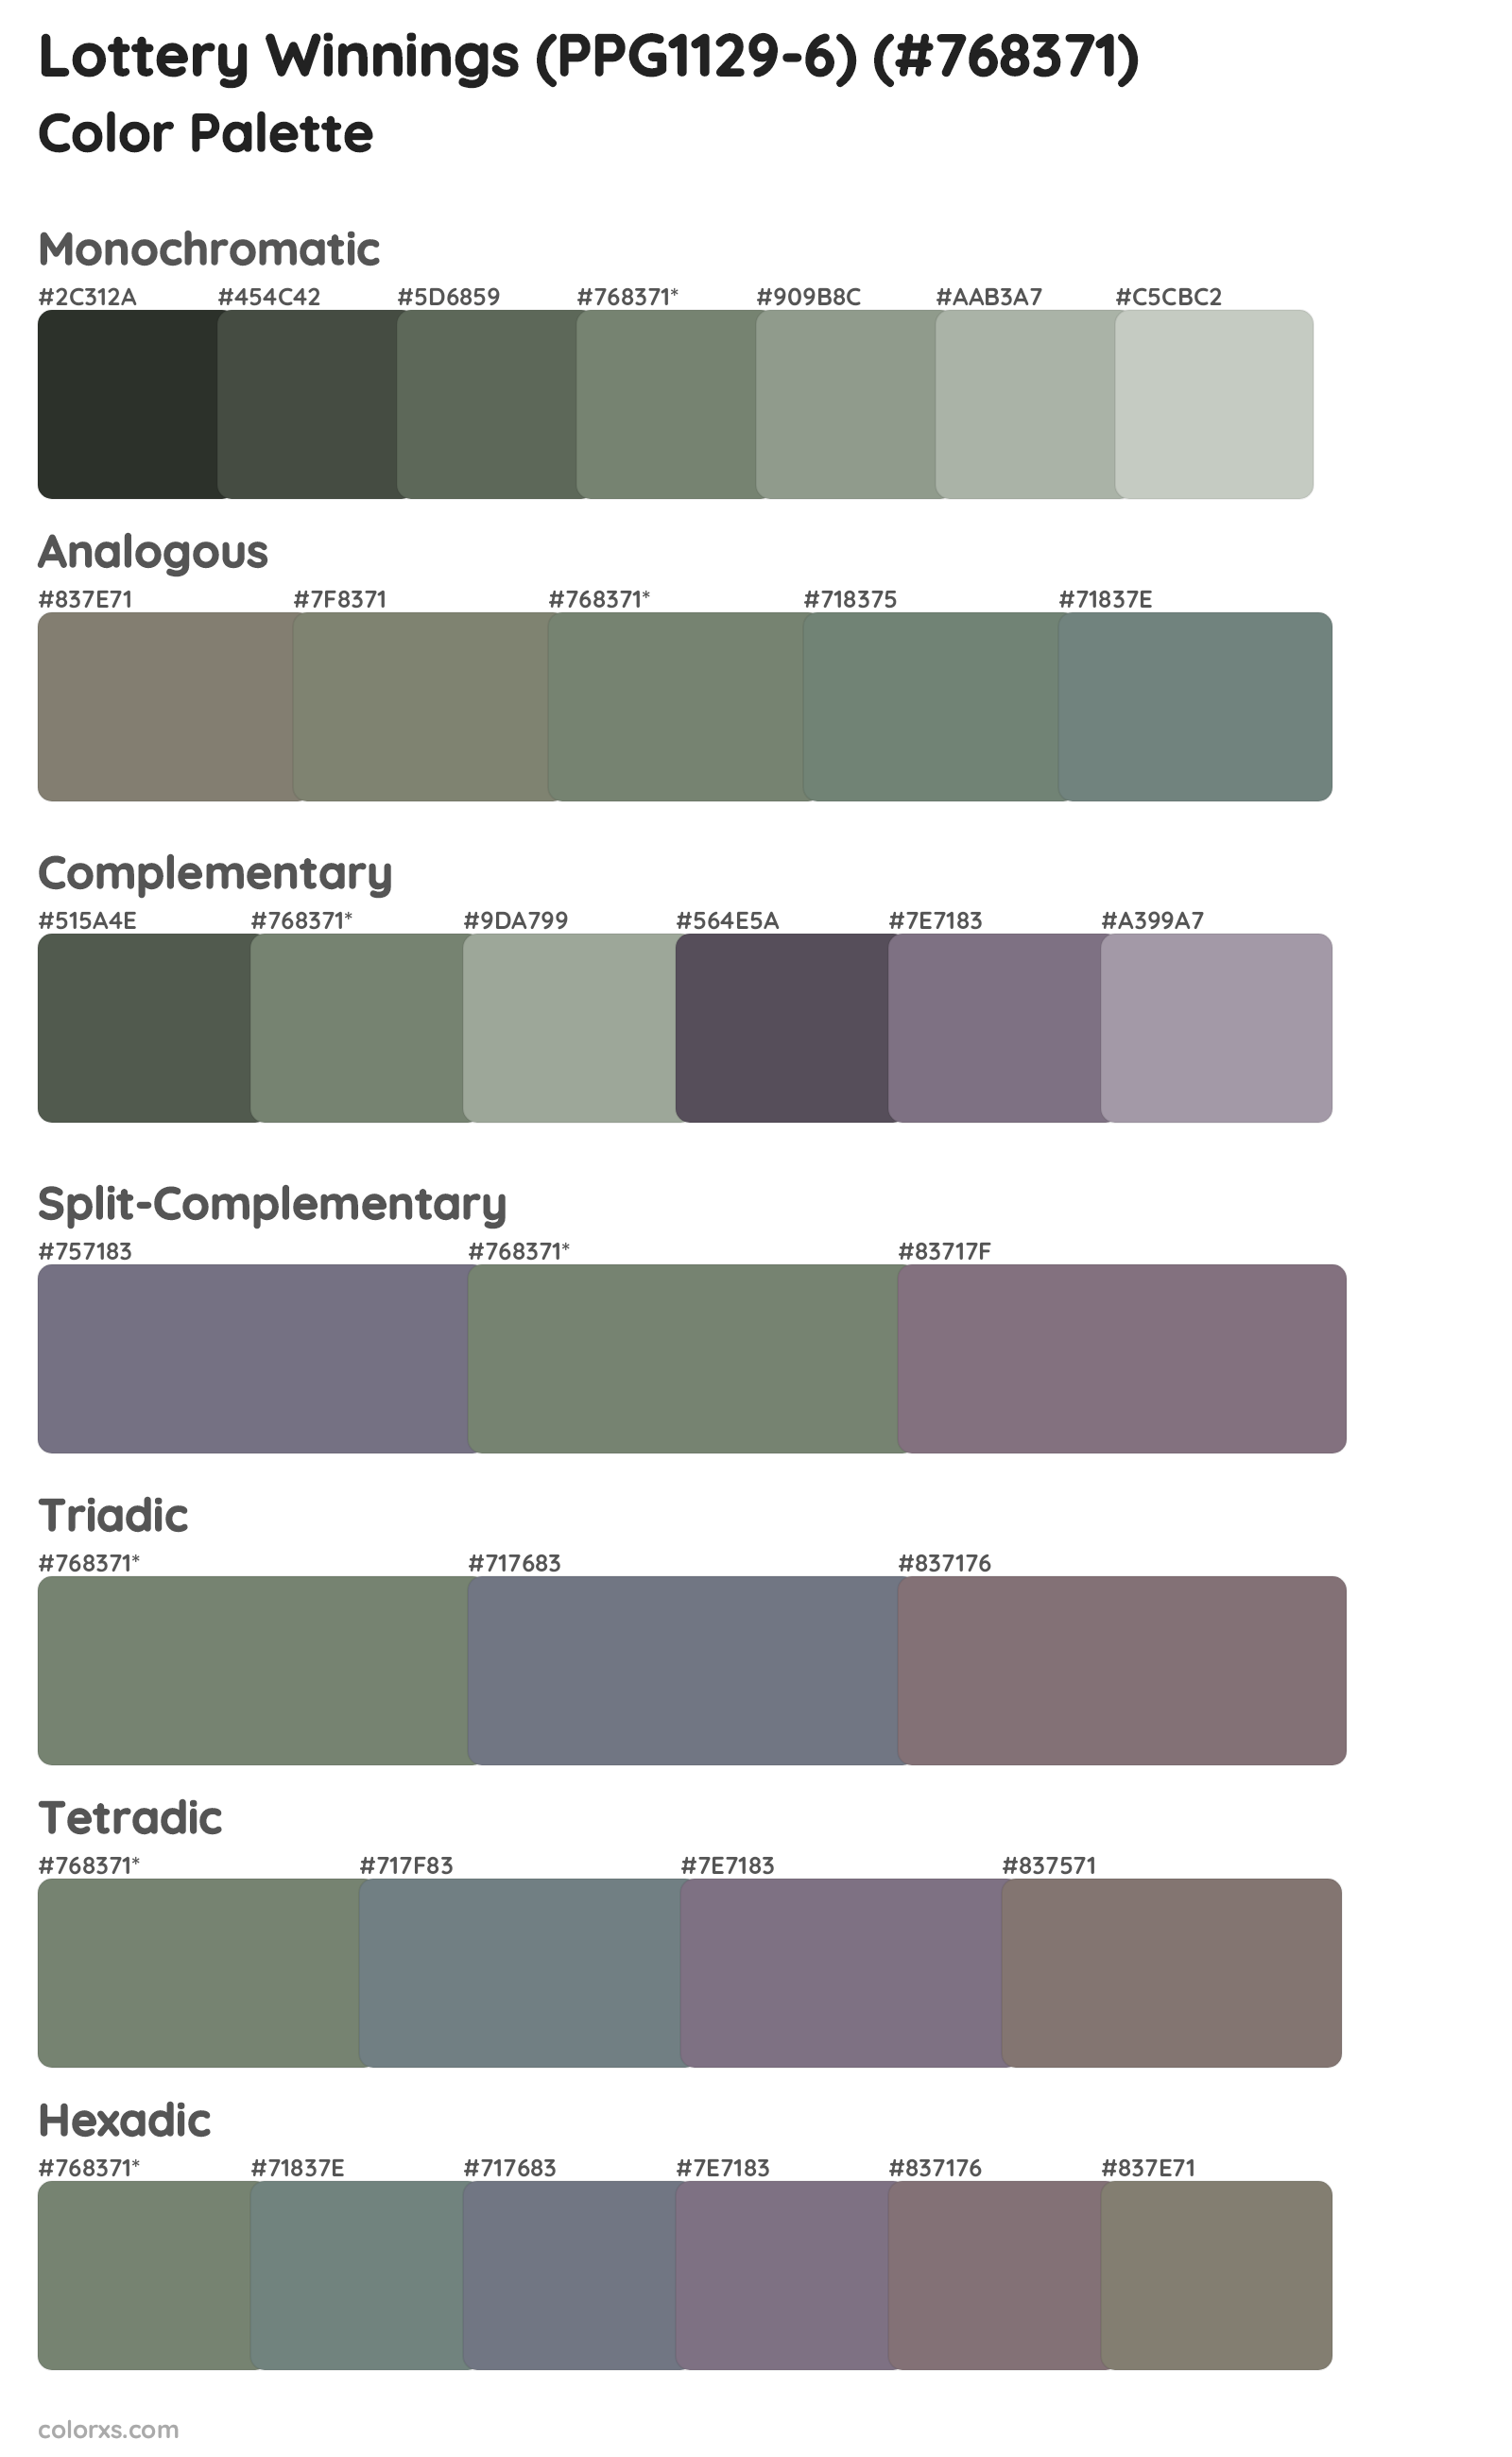 Lottery Winnings (PPG1129-6) Color Scheme Palettes